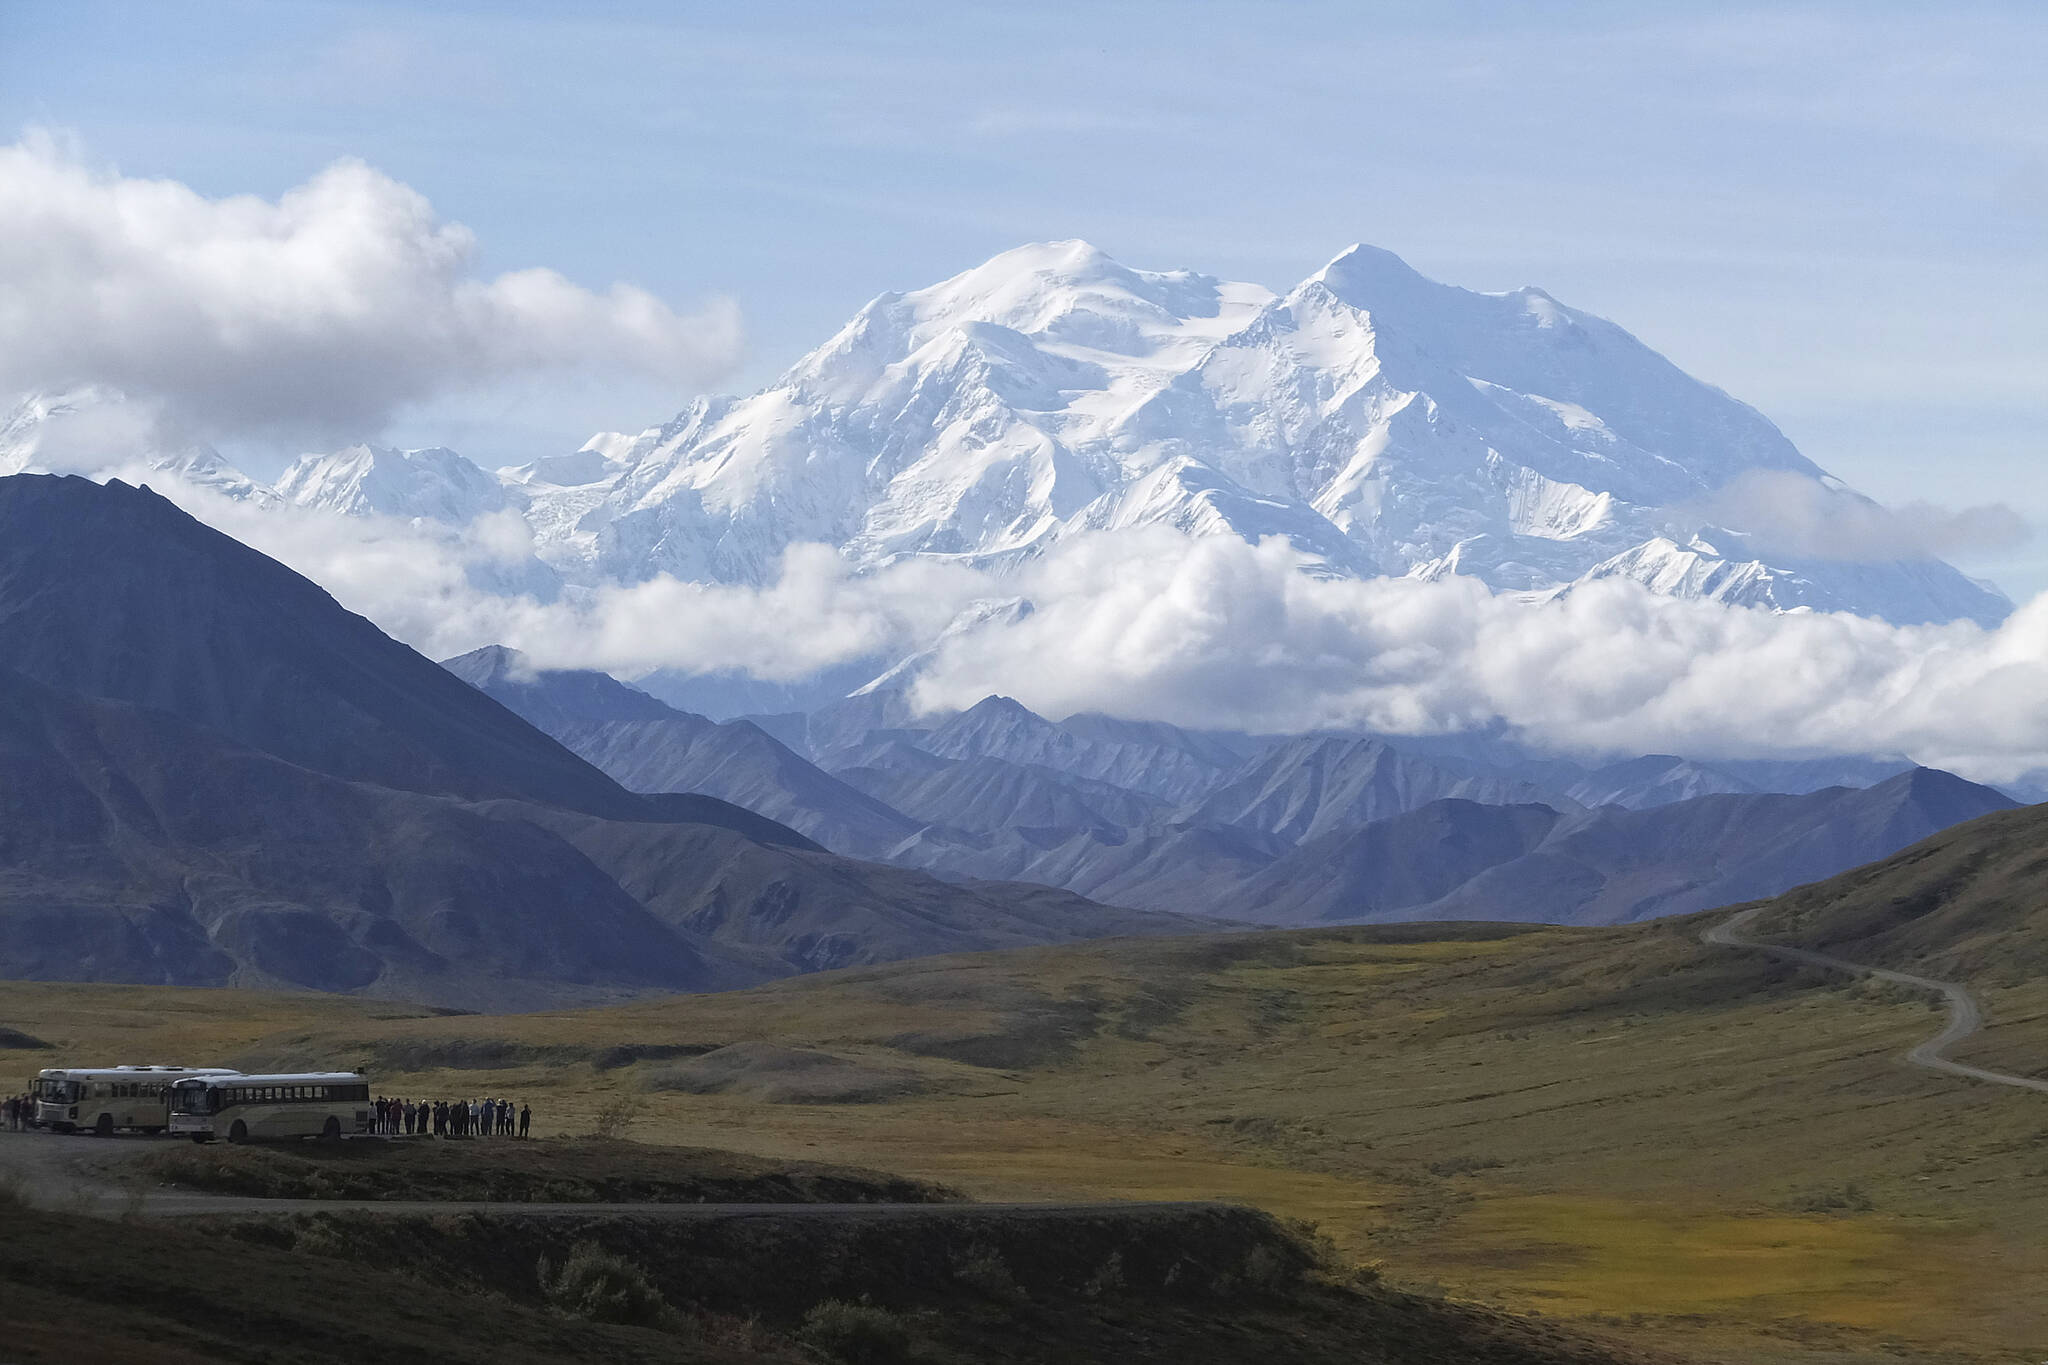 Sightseeing buses and tourists are seen at a pullout popular for taking in views of North America's tallest peak, Denali, in Denali National Park and Preserve in August 2016. (AP Photo / Becky Bohrer)